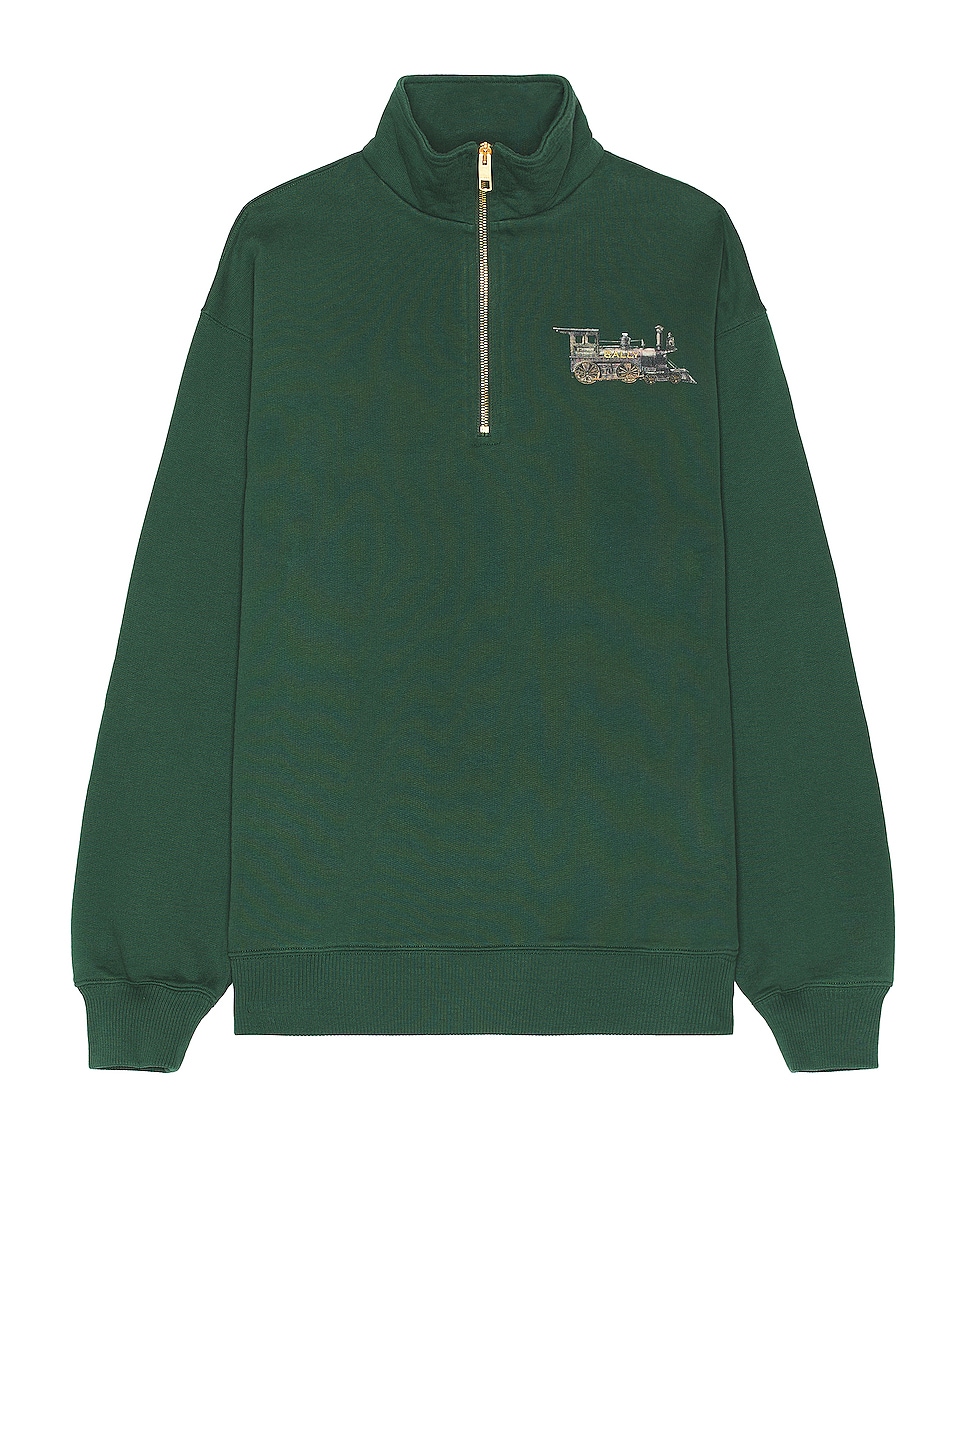 Image 1 of Bally Sweater in Kelly Green 50